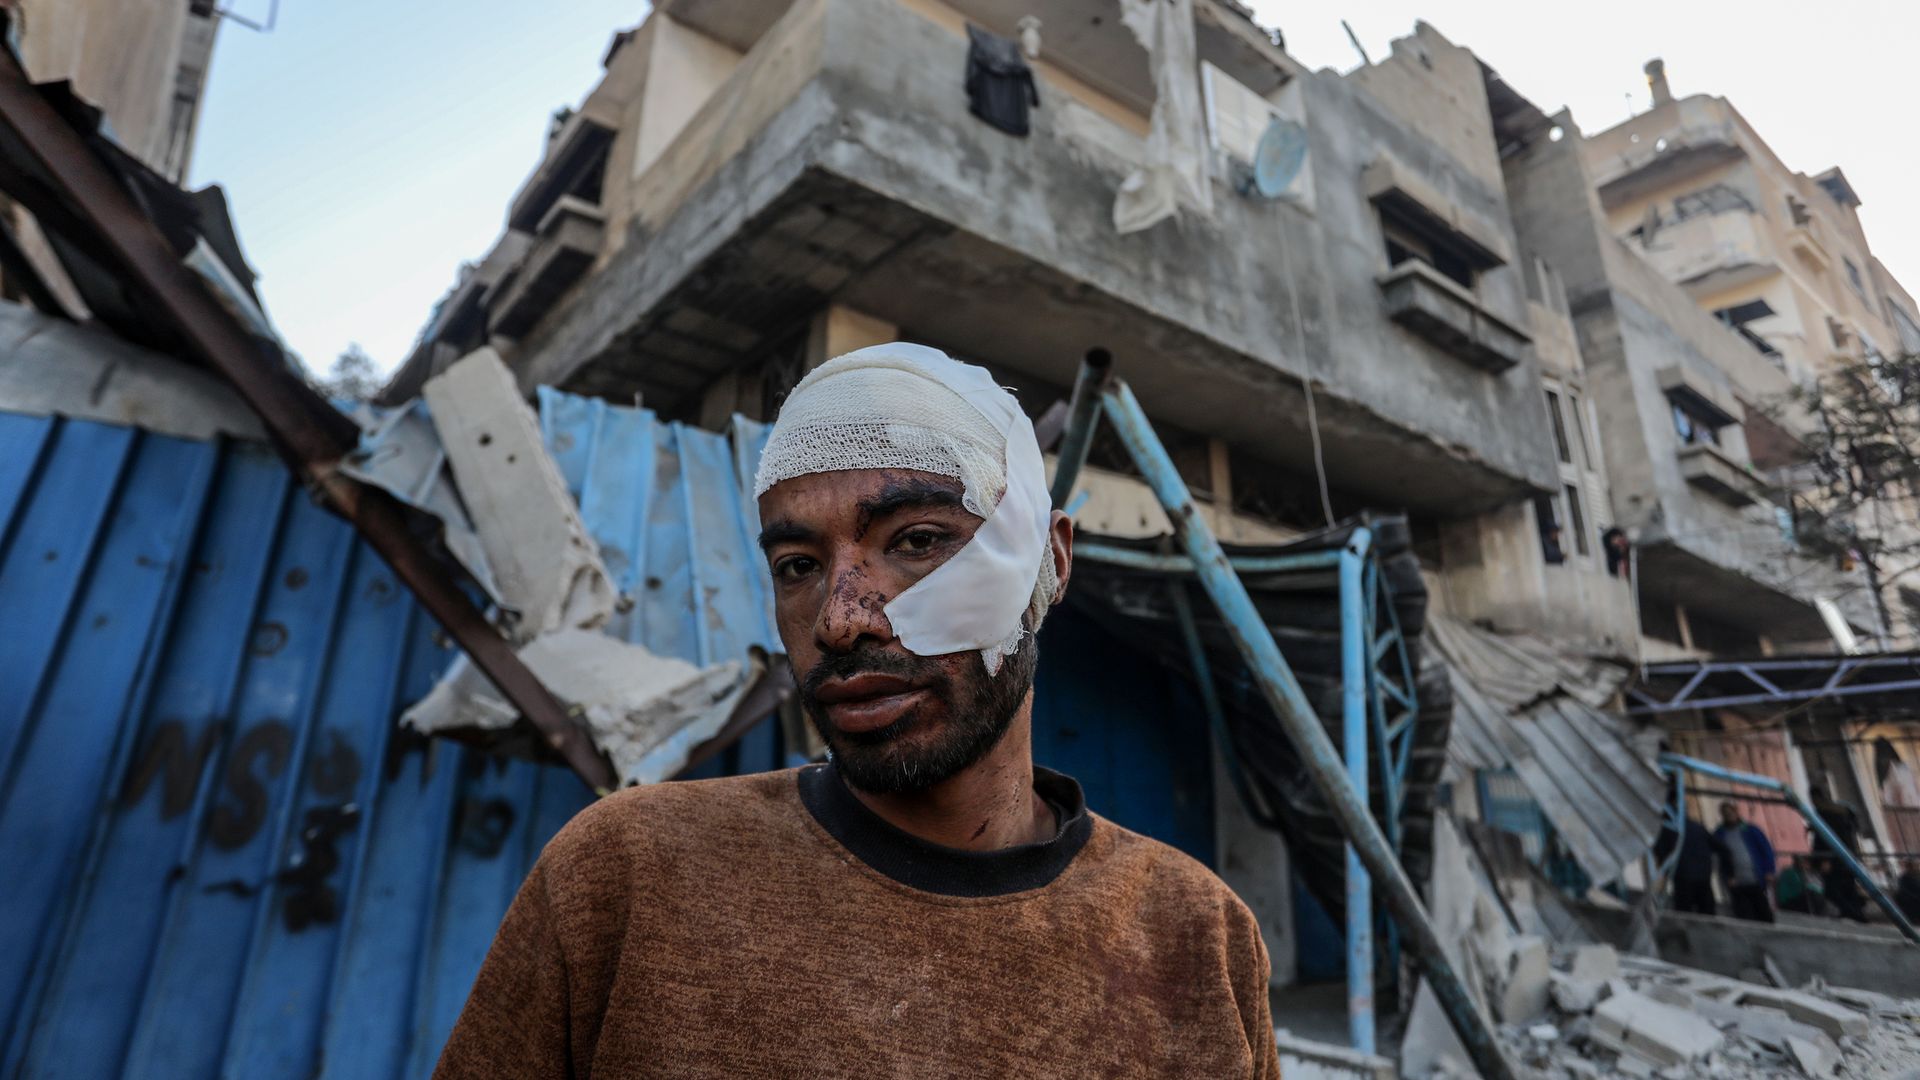  An injured Palestinian man as Palestinians inspect buildings destroyed or badly damaged due to Israeli attacks on Rafah City in the south of Gaz